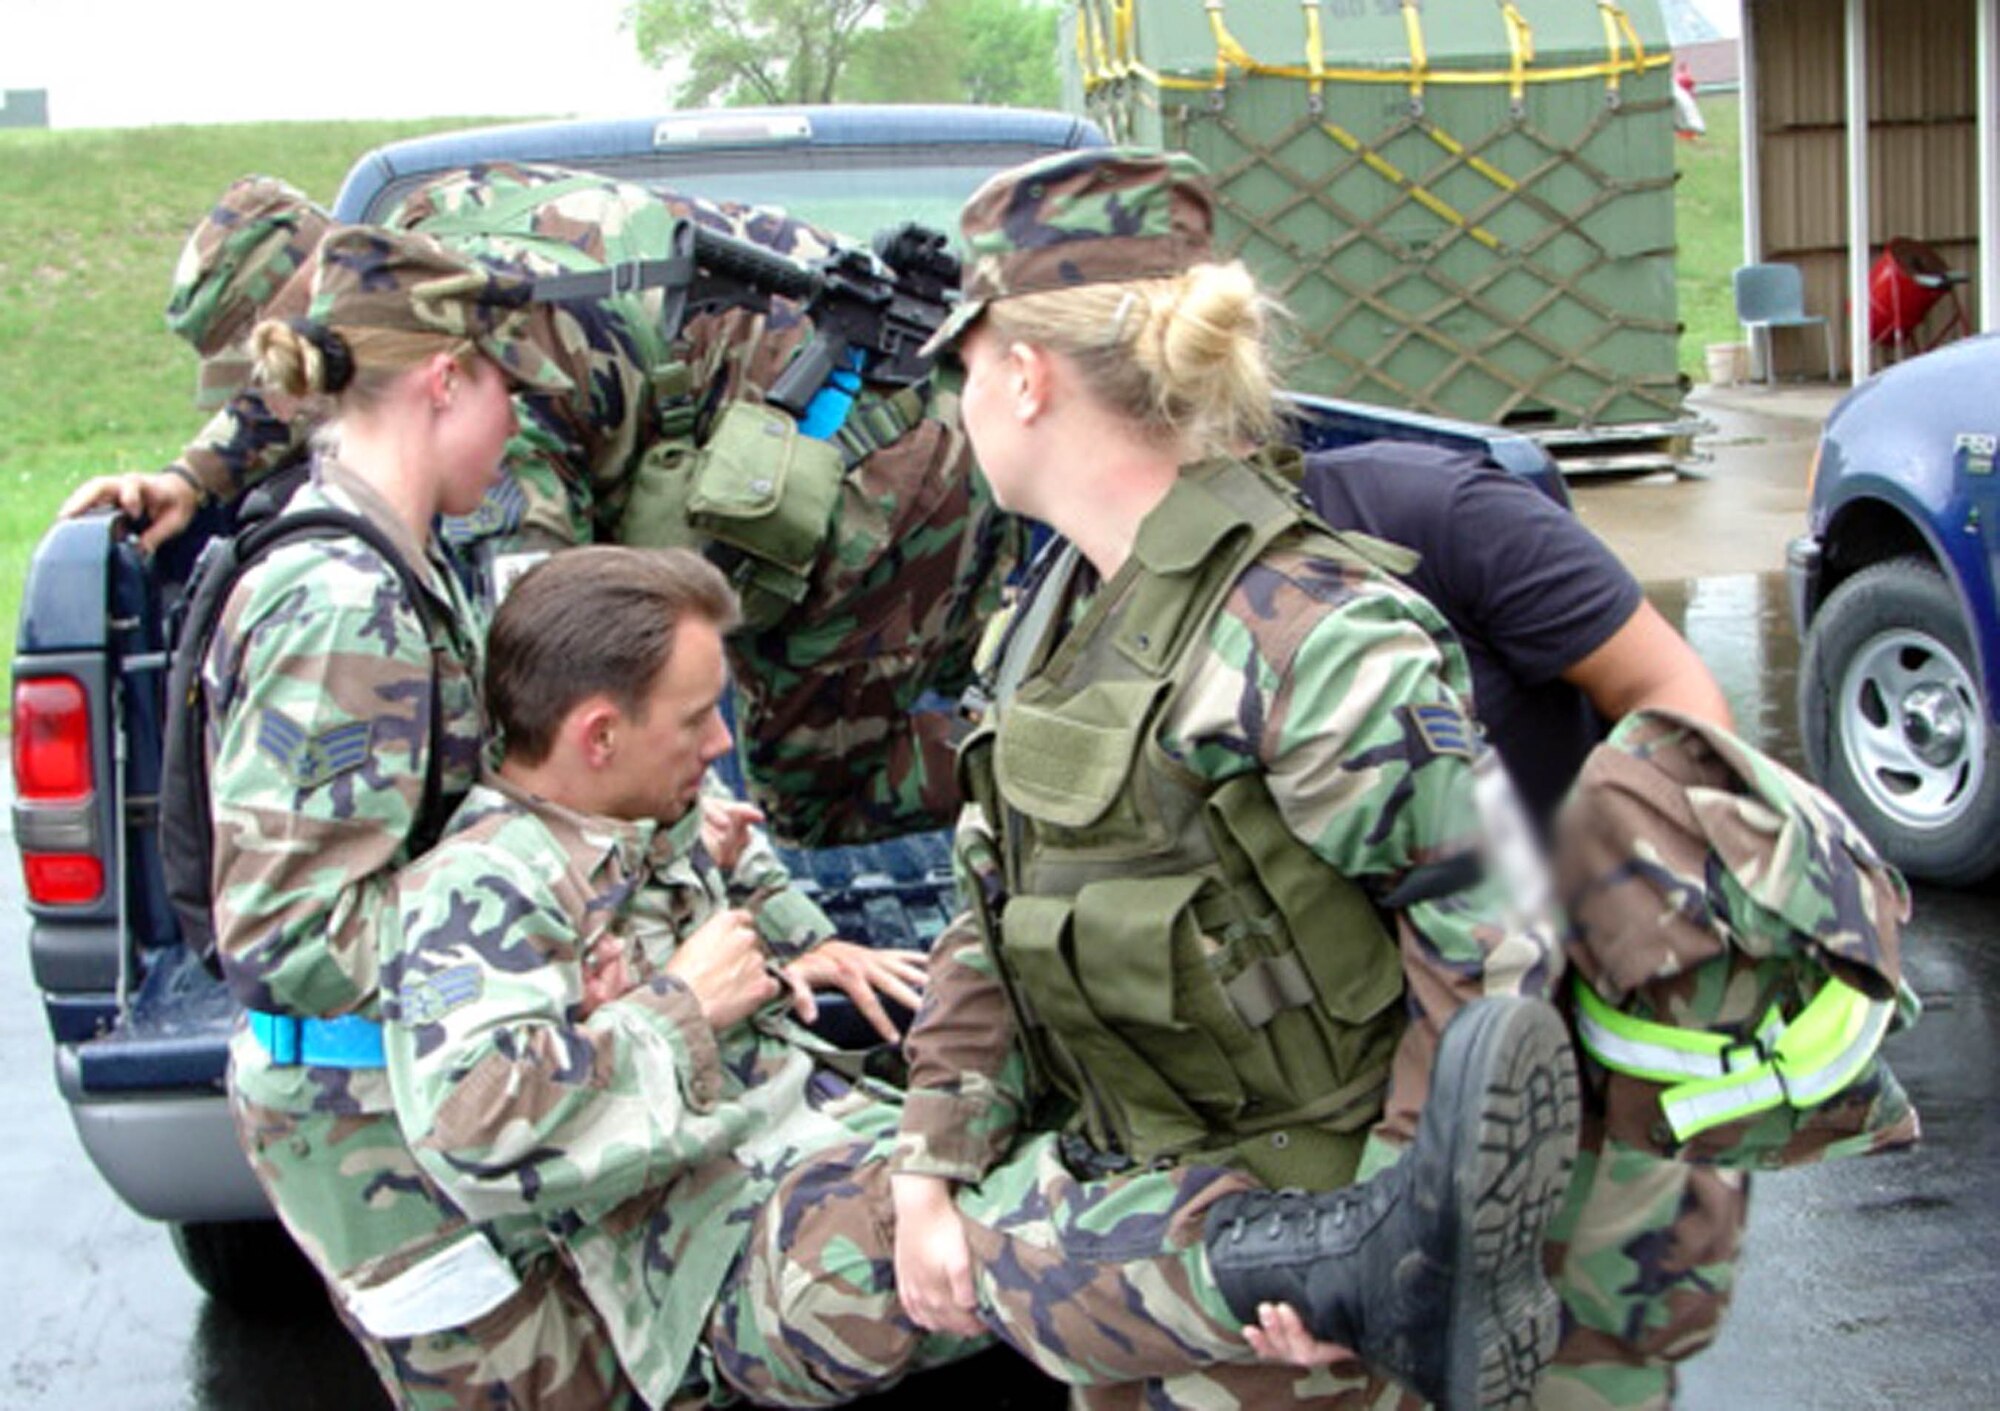 Airmen carefully remove an injured Airman using Self Aid and Buddy Care techniques during an exercise. Military members must have formal SABC training once every 22 months or within 90 days of a deployment. (U.S. Air Force photo)